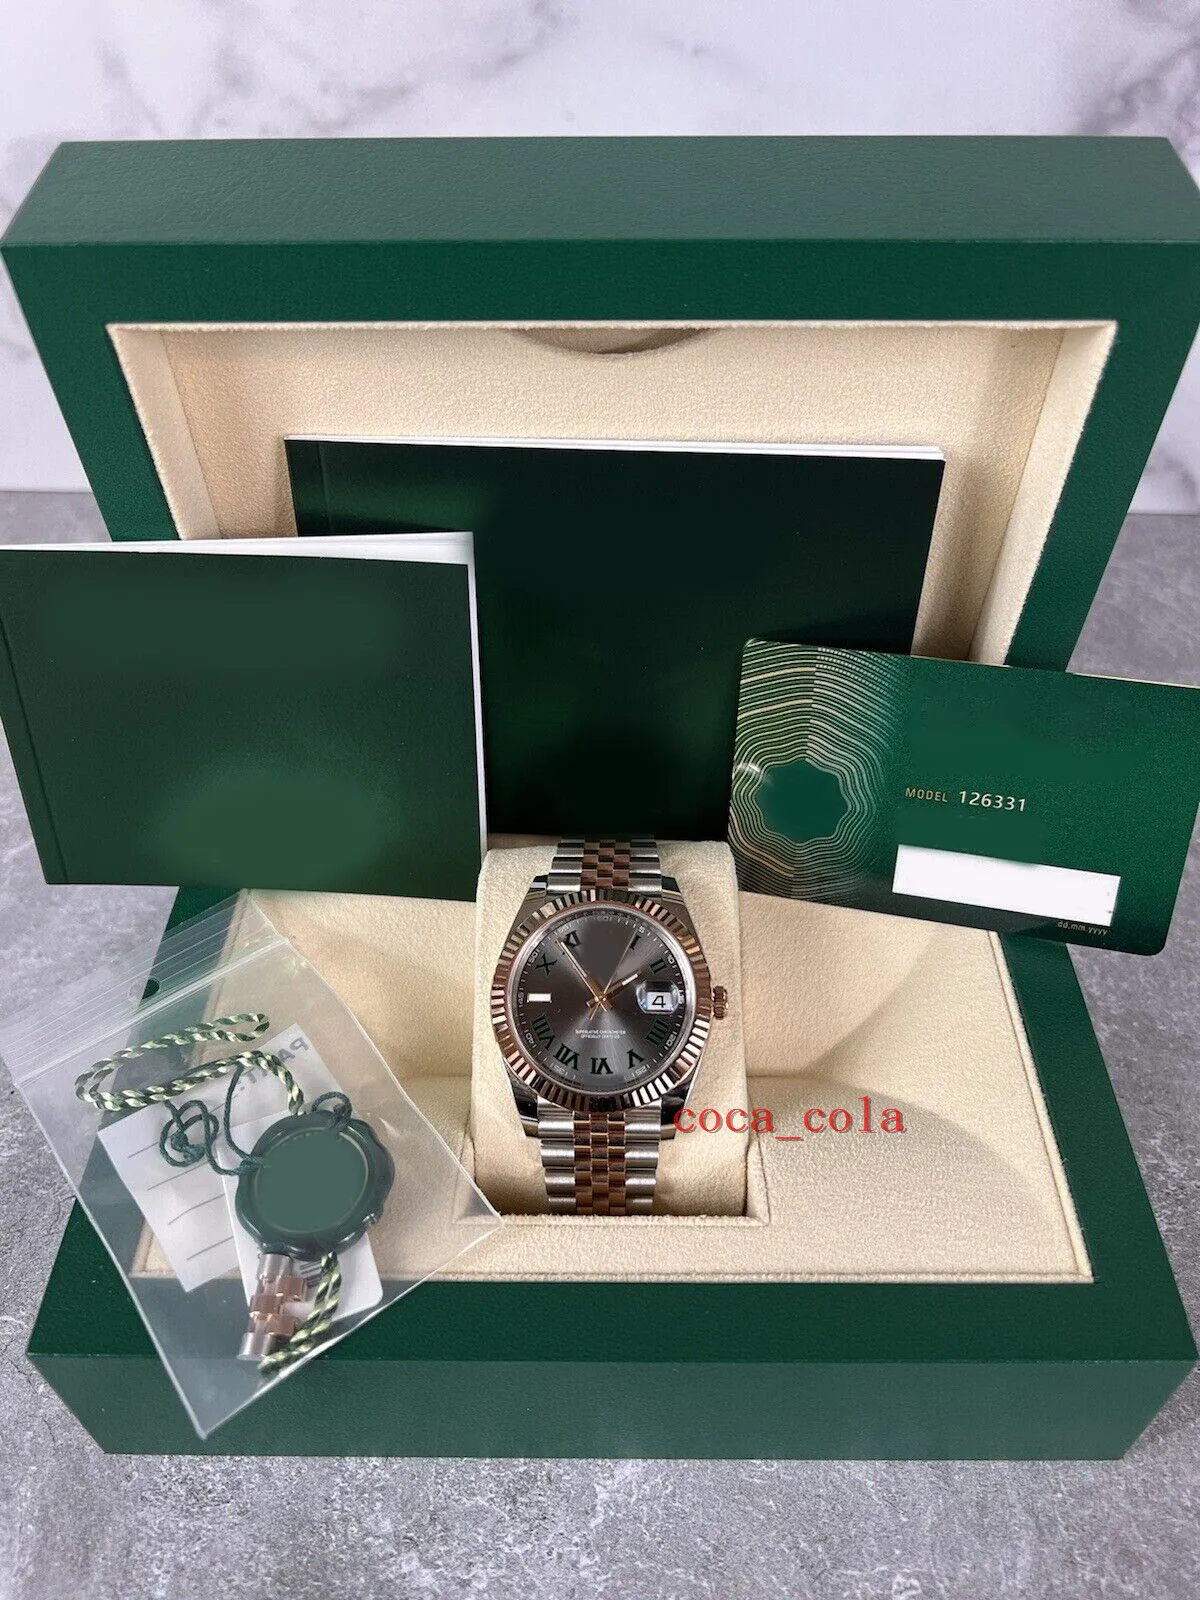 2023 QC Check Wristwatch 41mm Datejust 41 Two Tone Rose Gold Wimbledon Jubilee 126331 Mechanical Automatic Movement Men's Watches Bracelet BOX/PAPERS